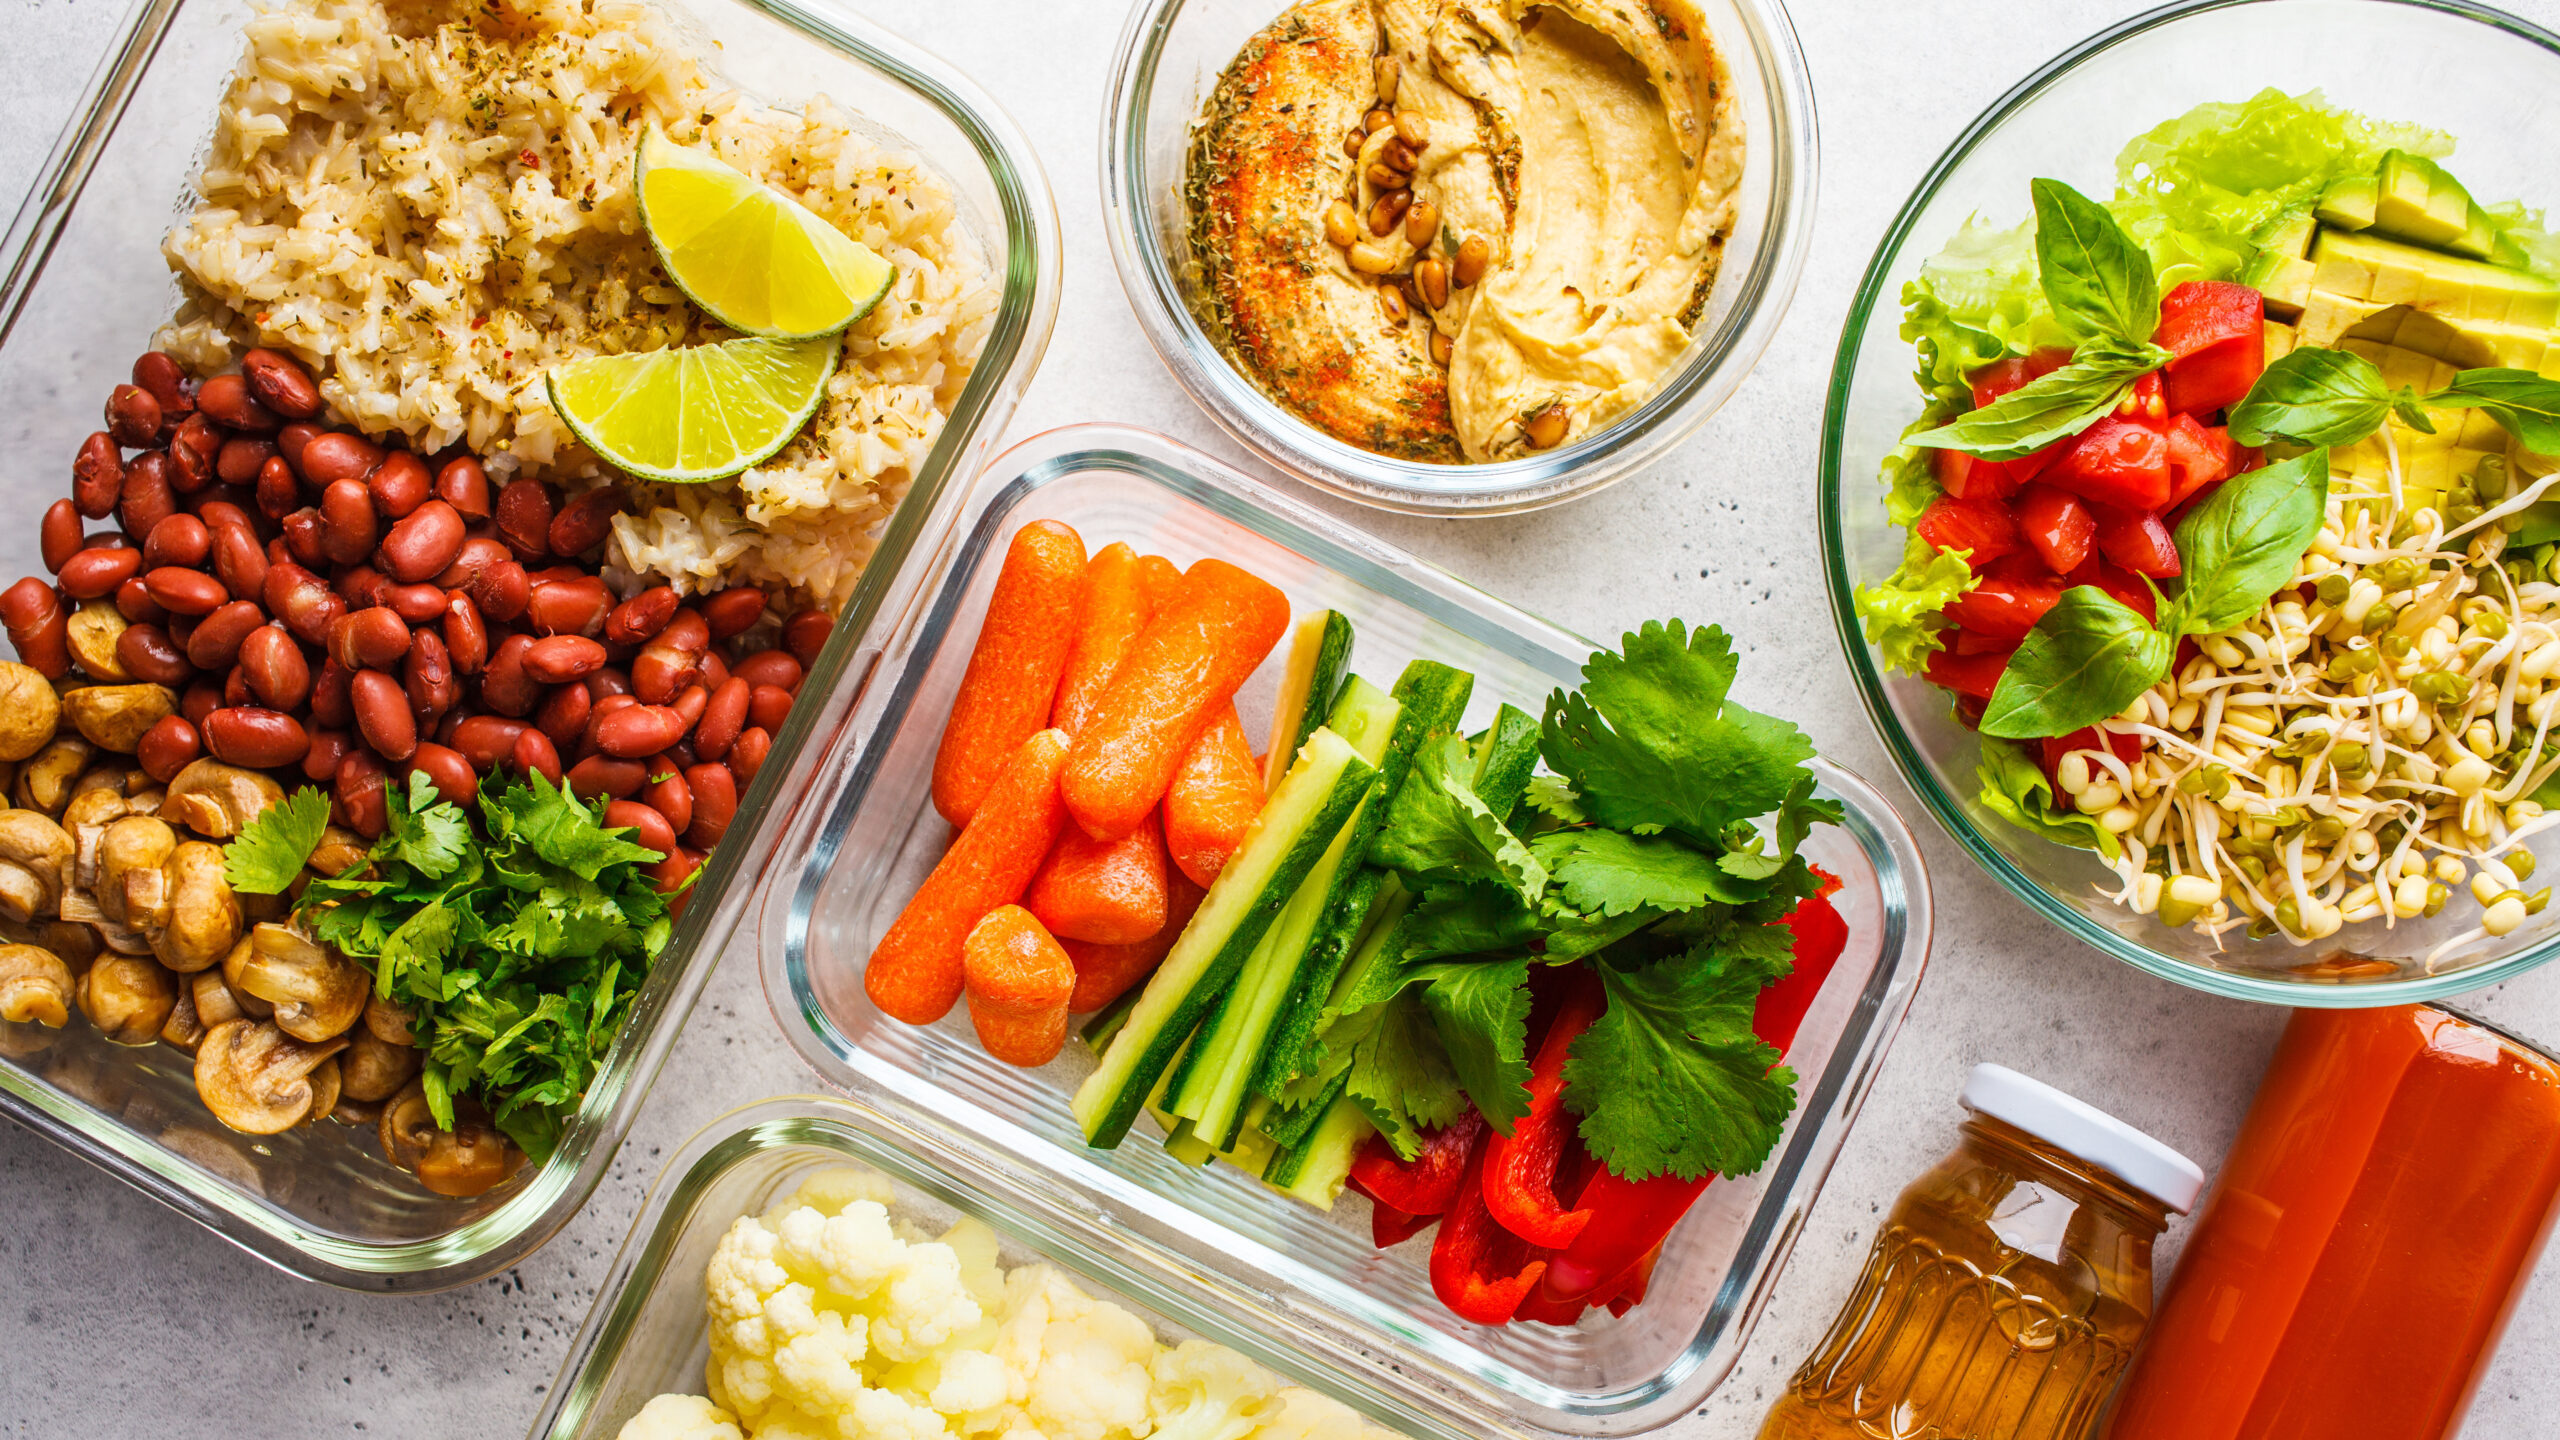 Image for Hot-Lunch Meal Prep